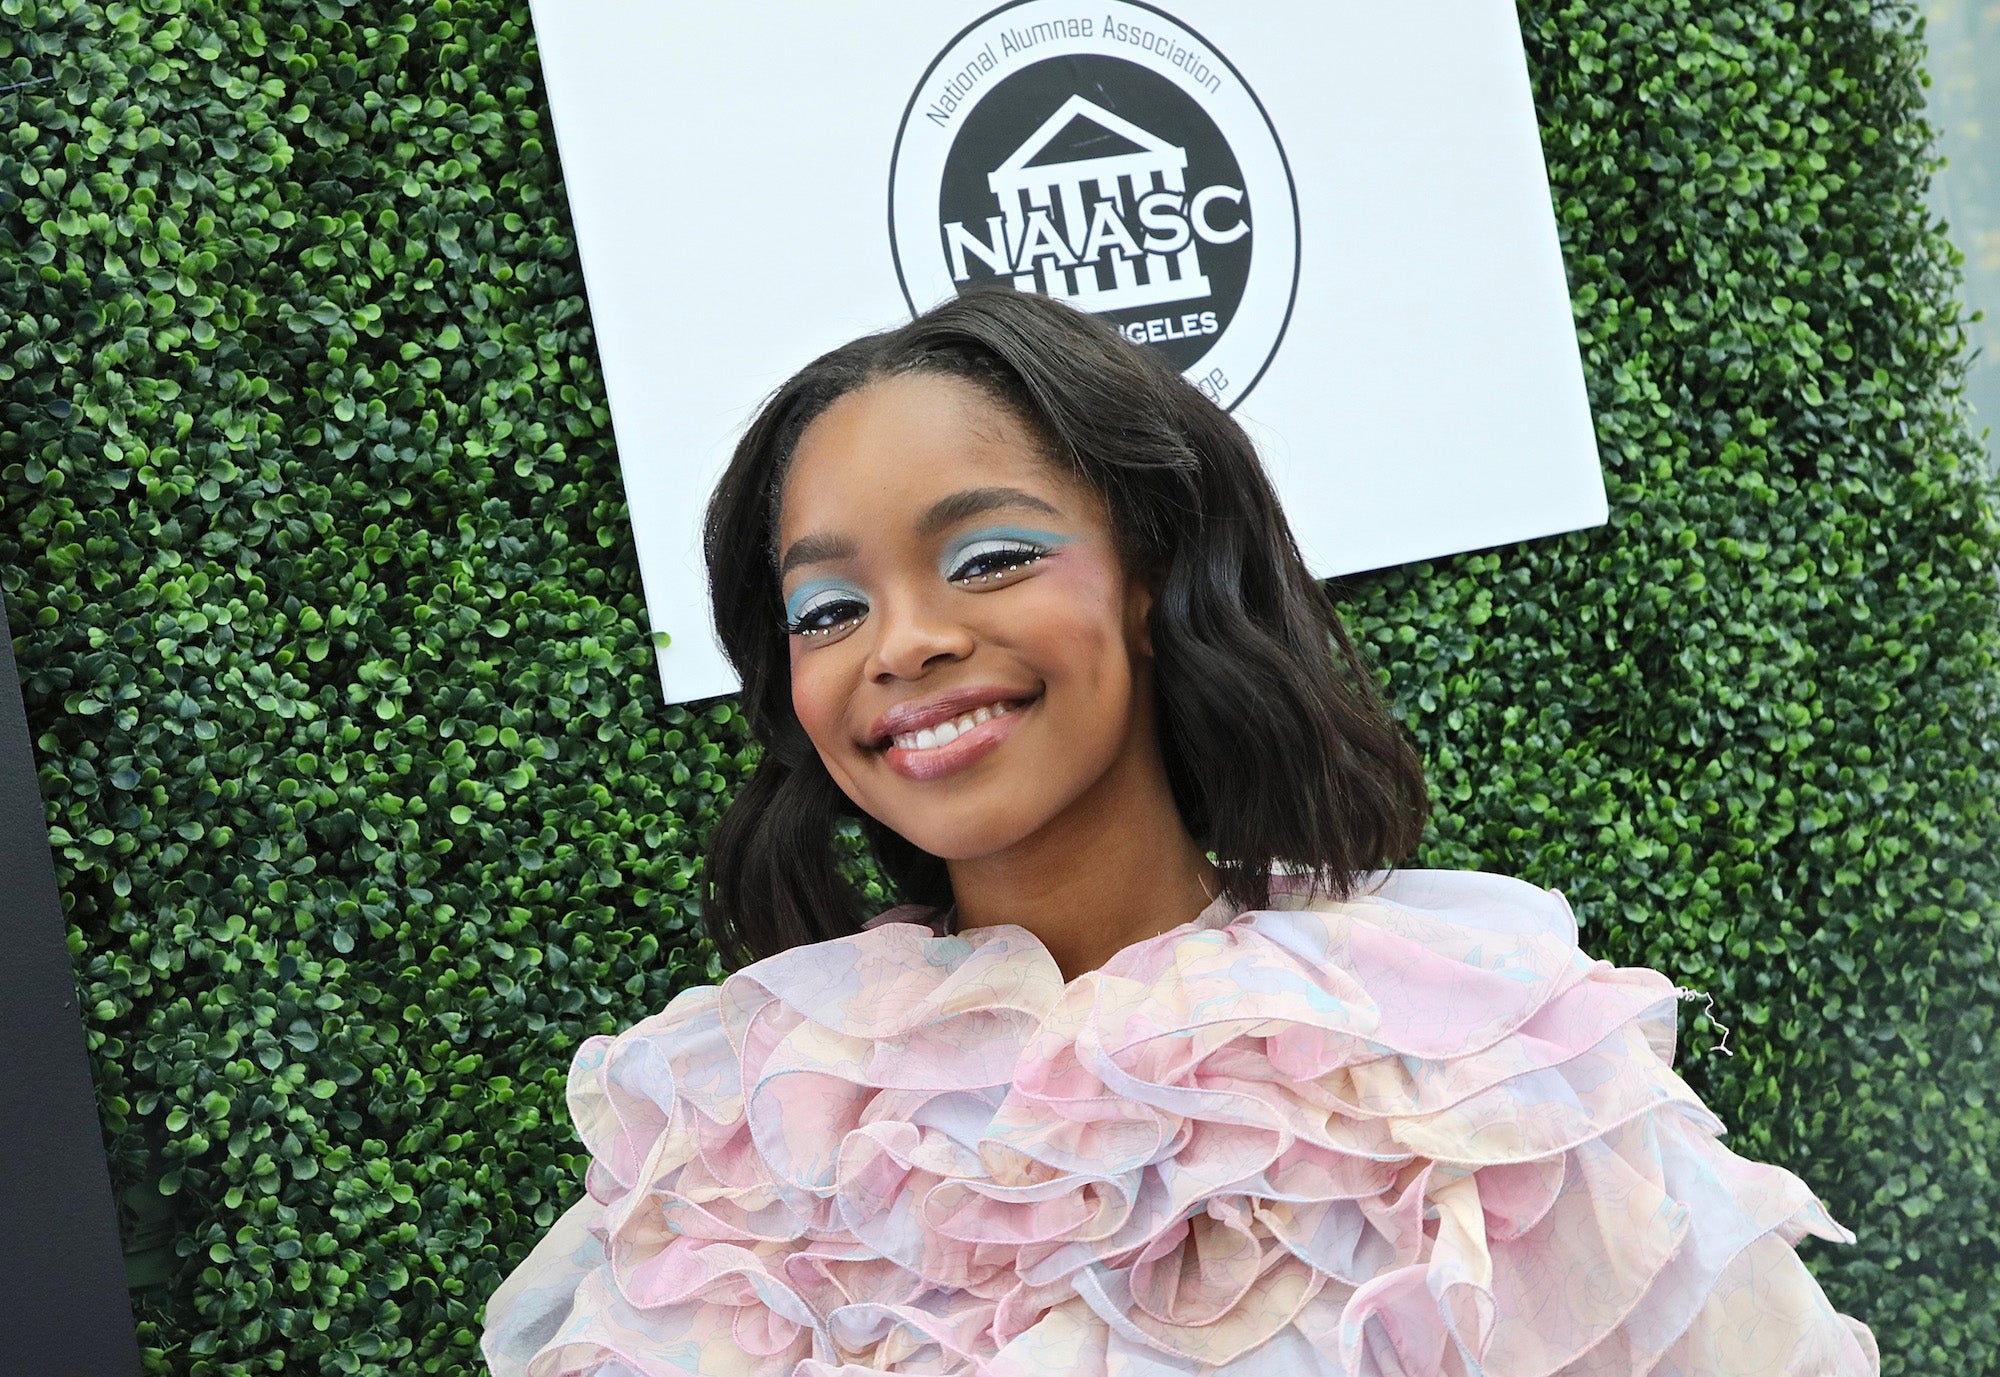 Marsai Martin Enlists Young Hollywood Stars For Comfy Spin On #DontRushChallenge